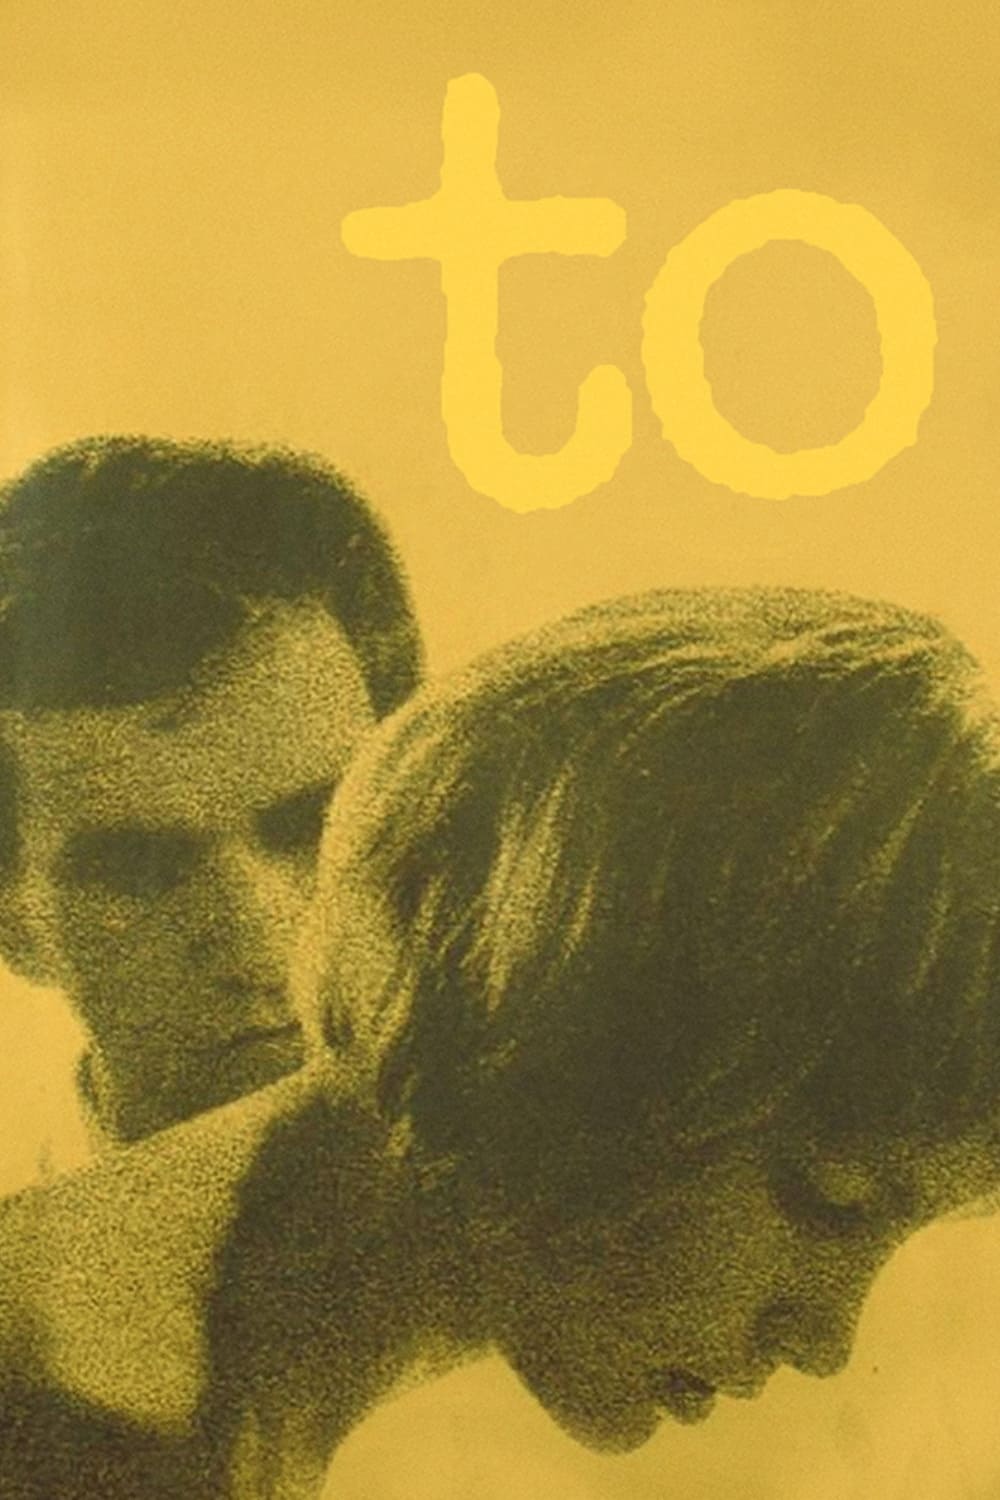 To (1964)